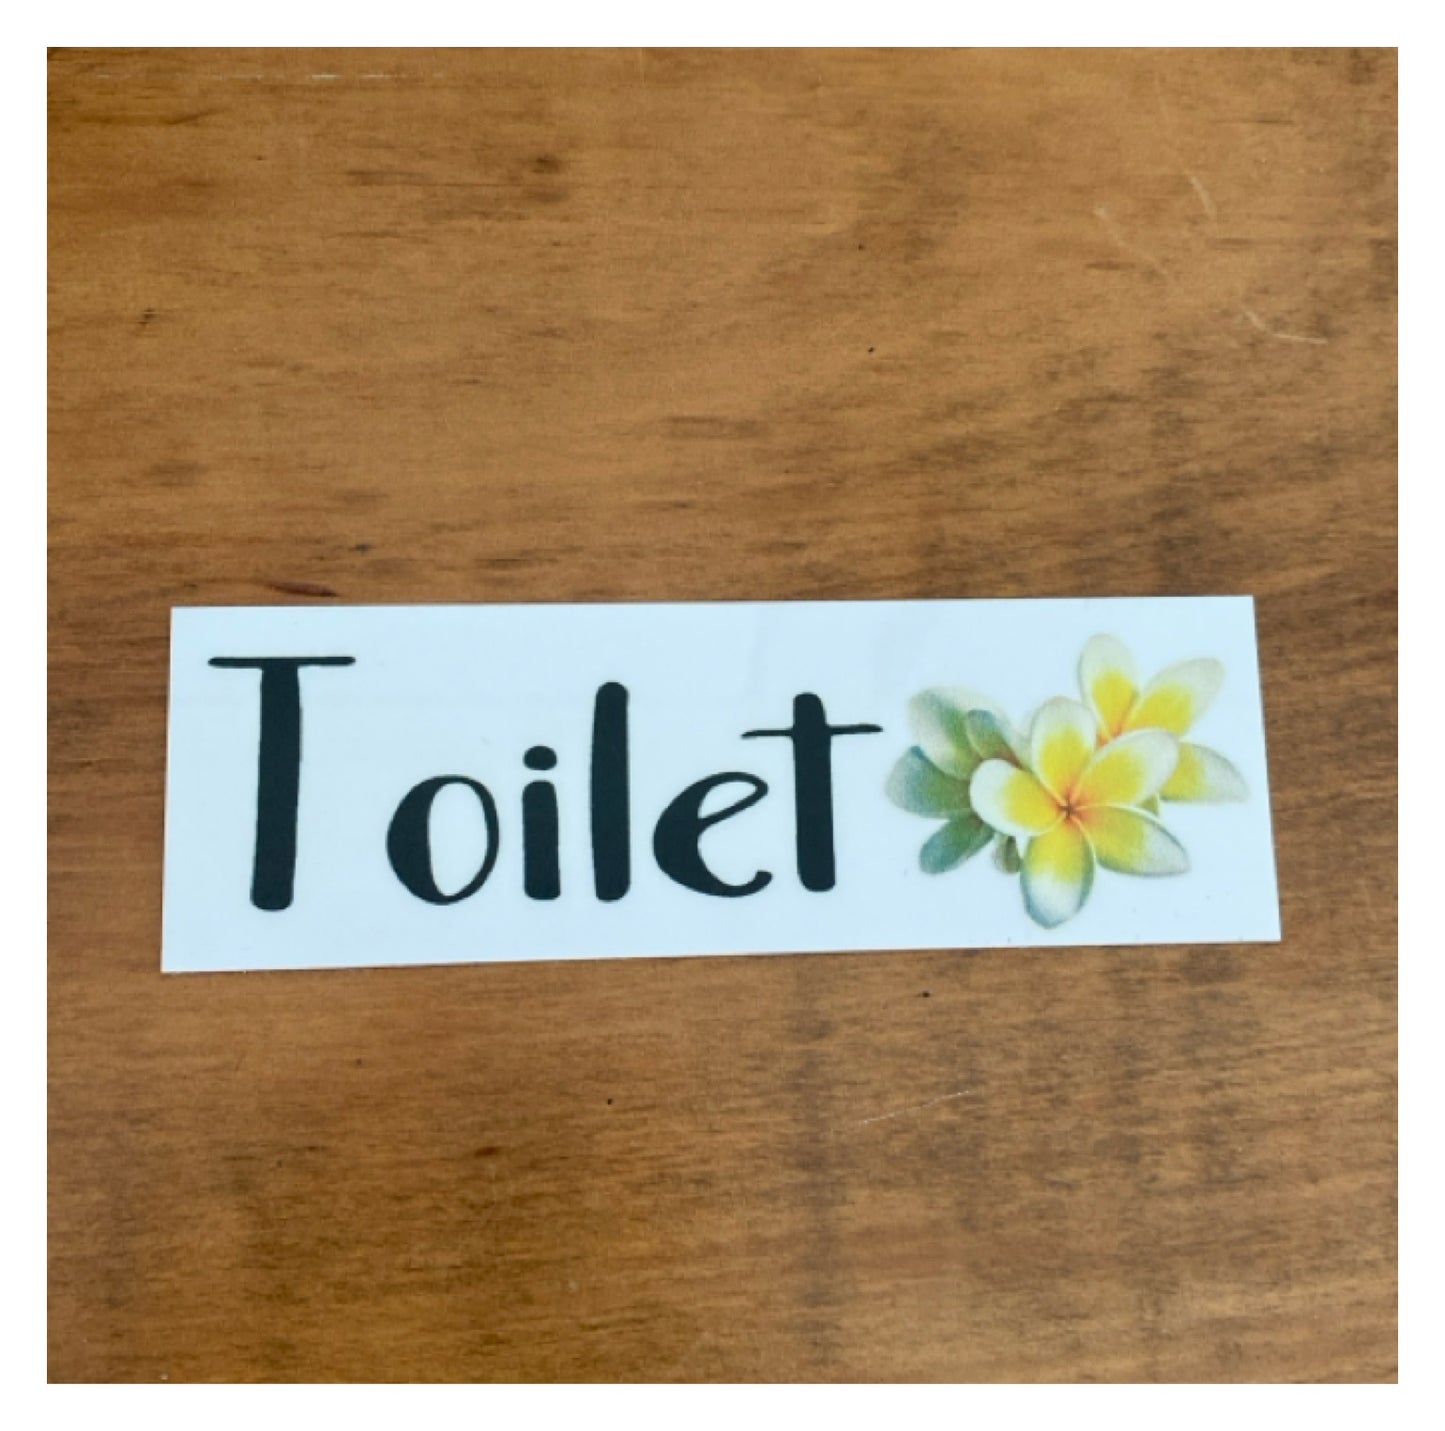 Frangipani Toilet Laundry Bathroom Door Sign - The Renmy Store Homewares & Gifts 